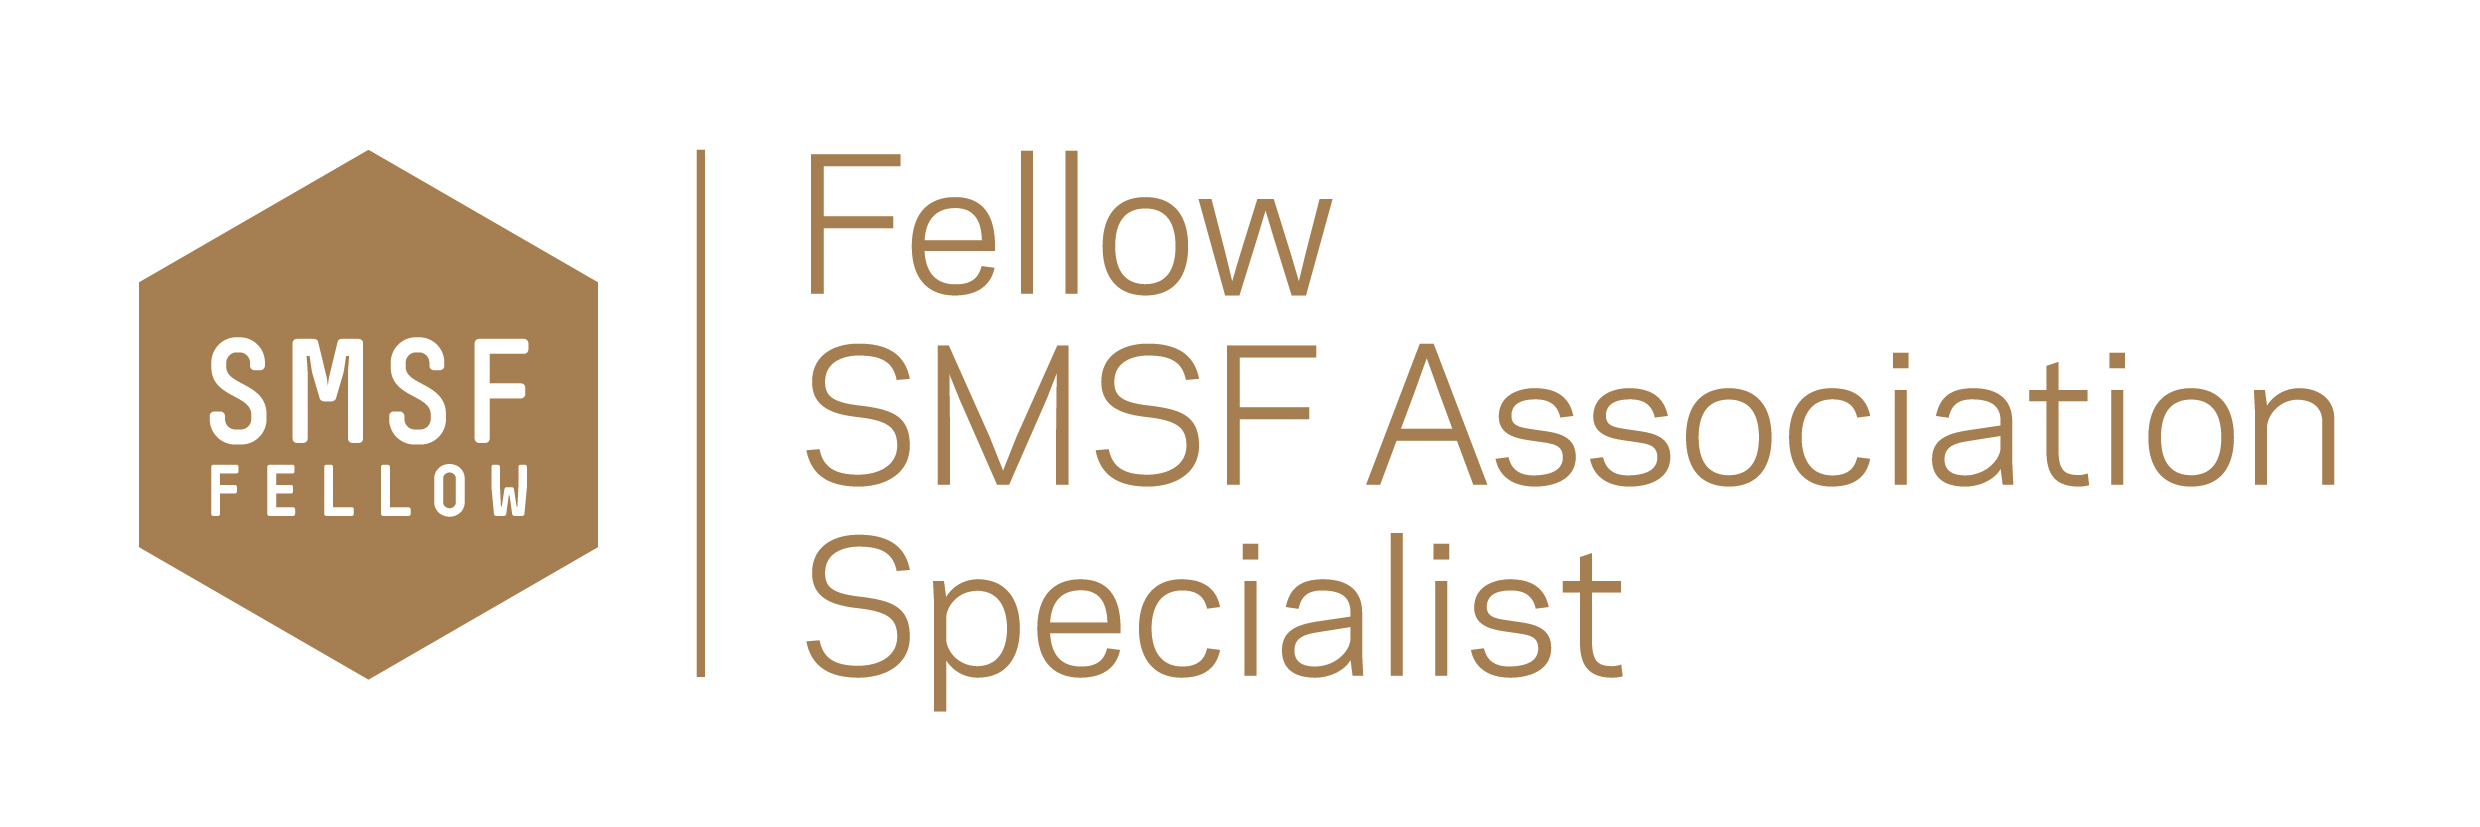 Liam is a Fellow of the SMSF Association, their highest Specialist rating